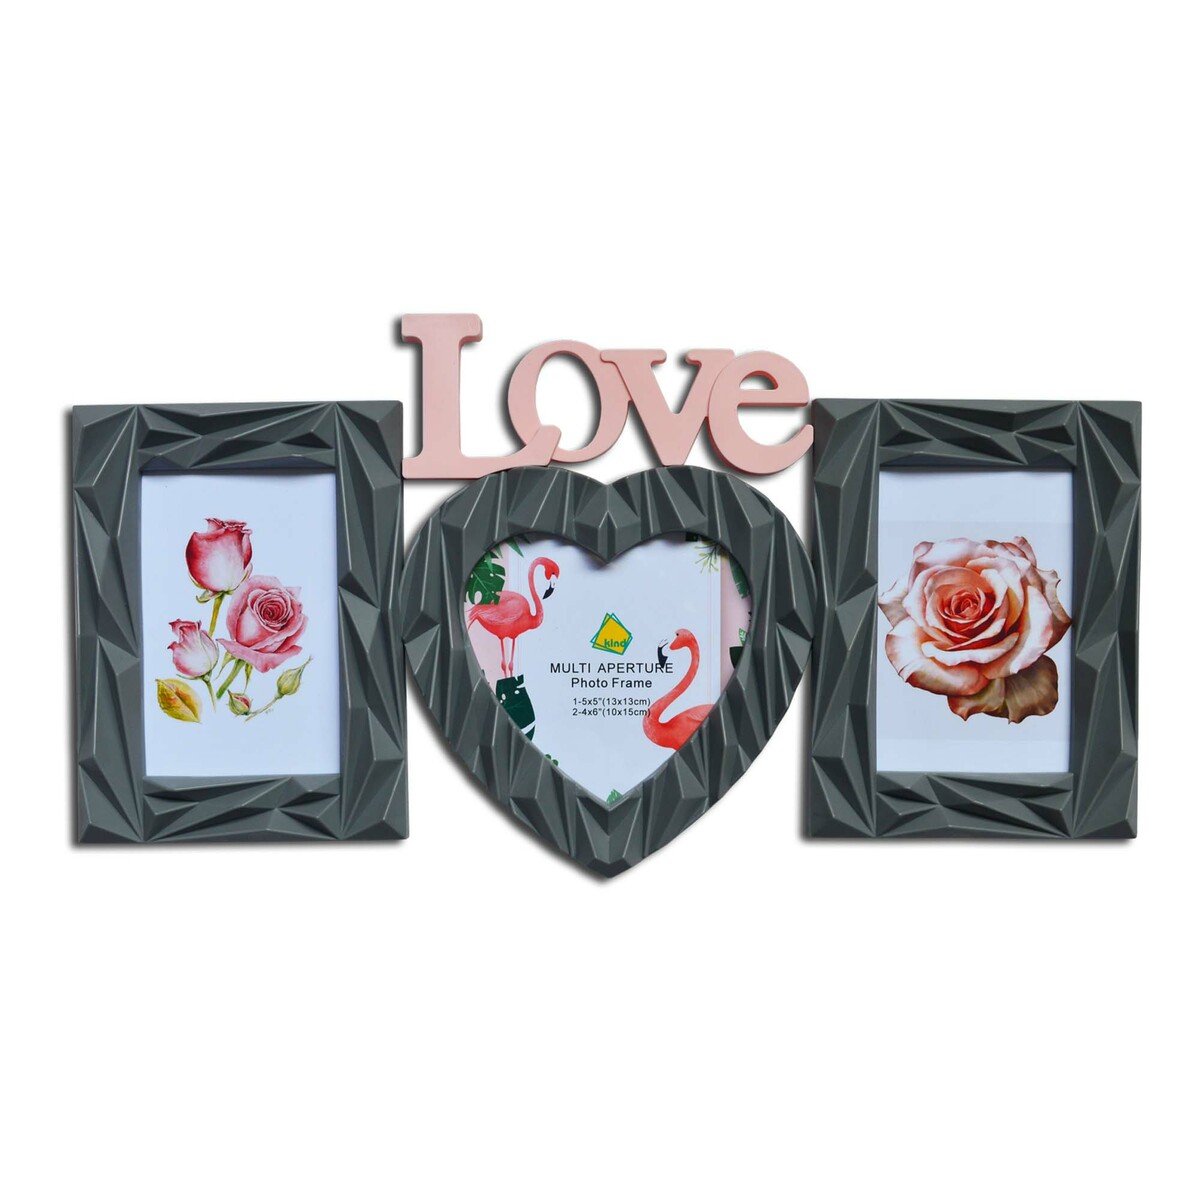 Maple Leaf Collage PVC Picture Frame KD820944 Love3